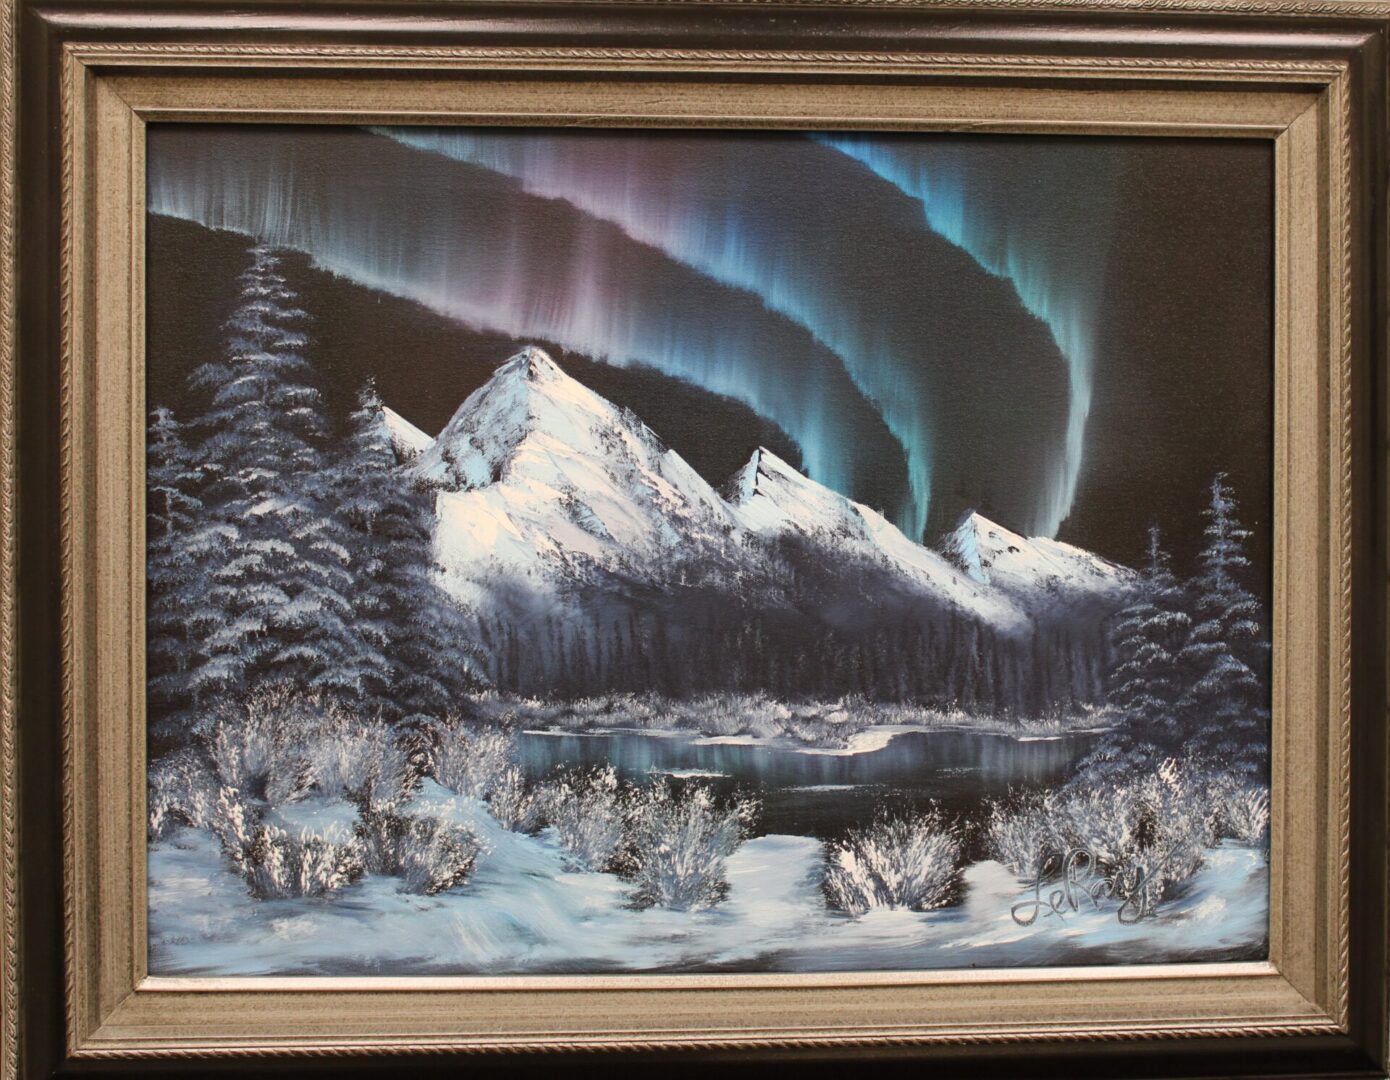 framed painting of northern lights with mountain and snowy trees